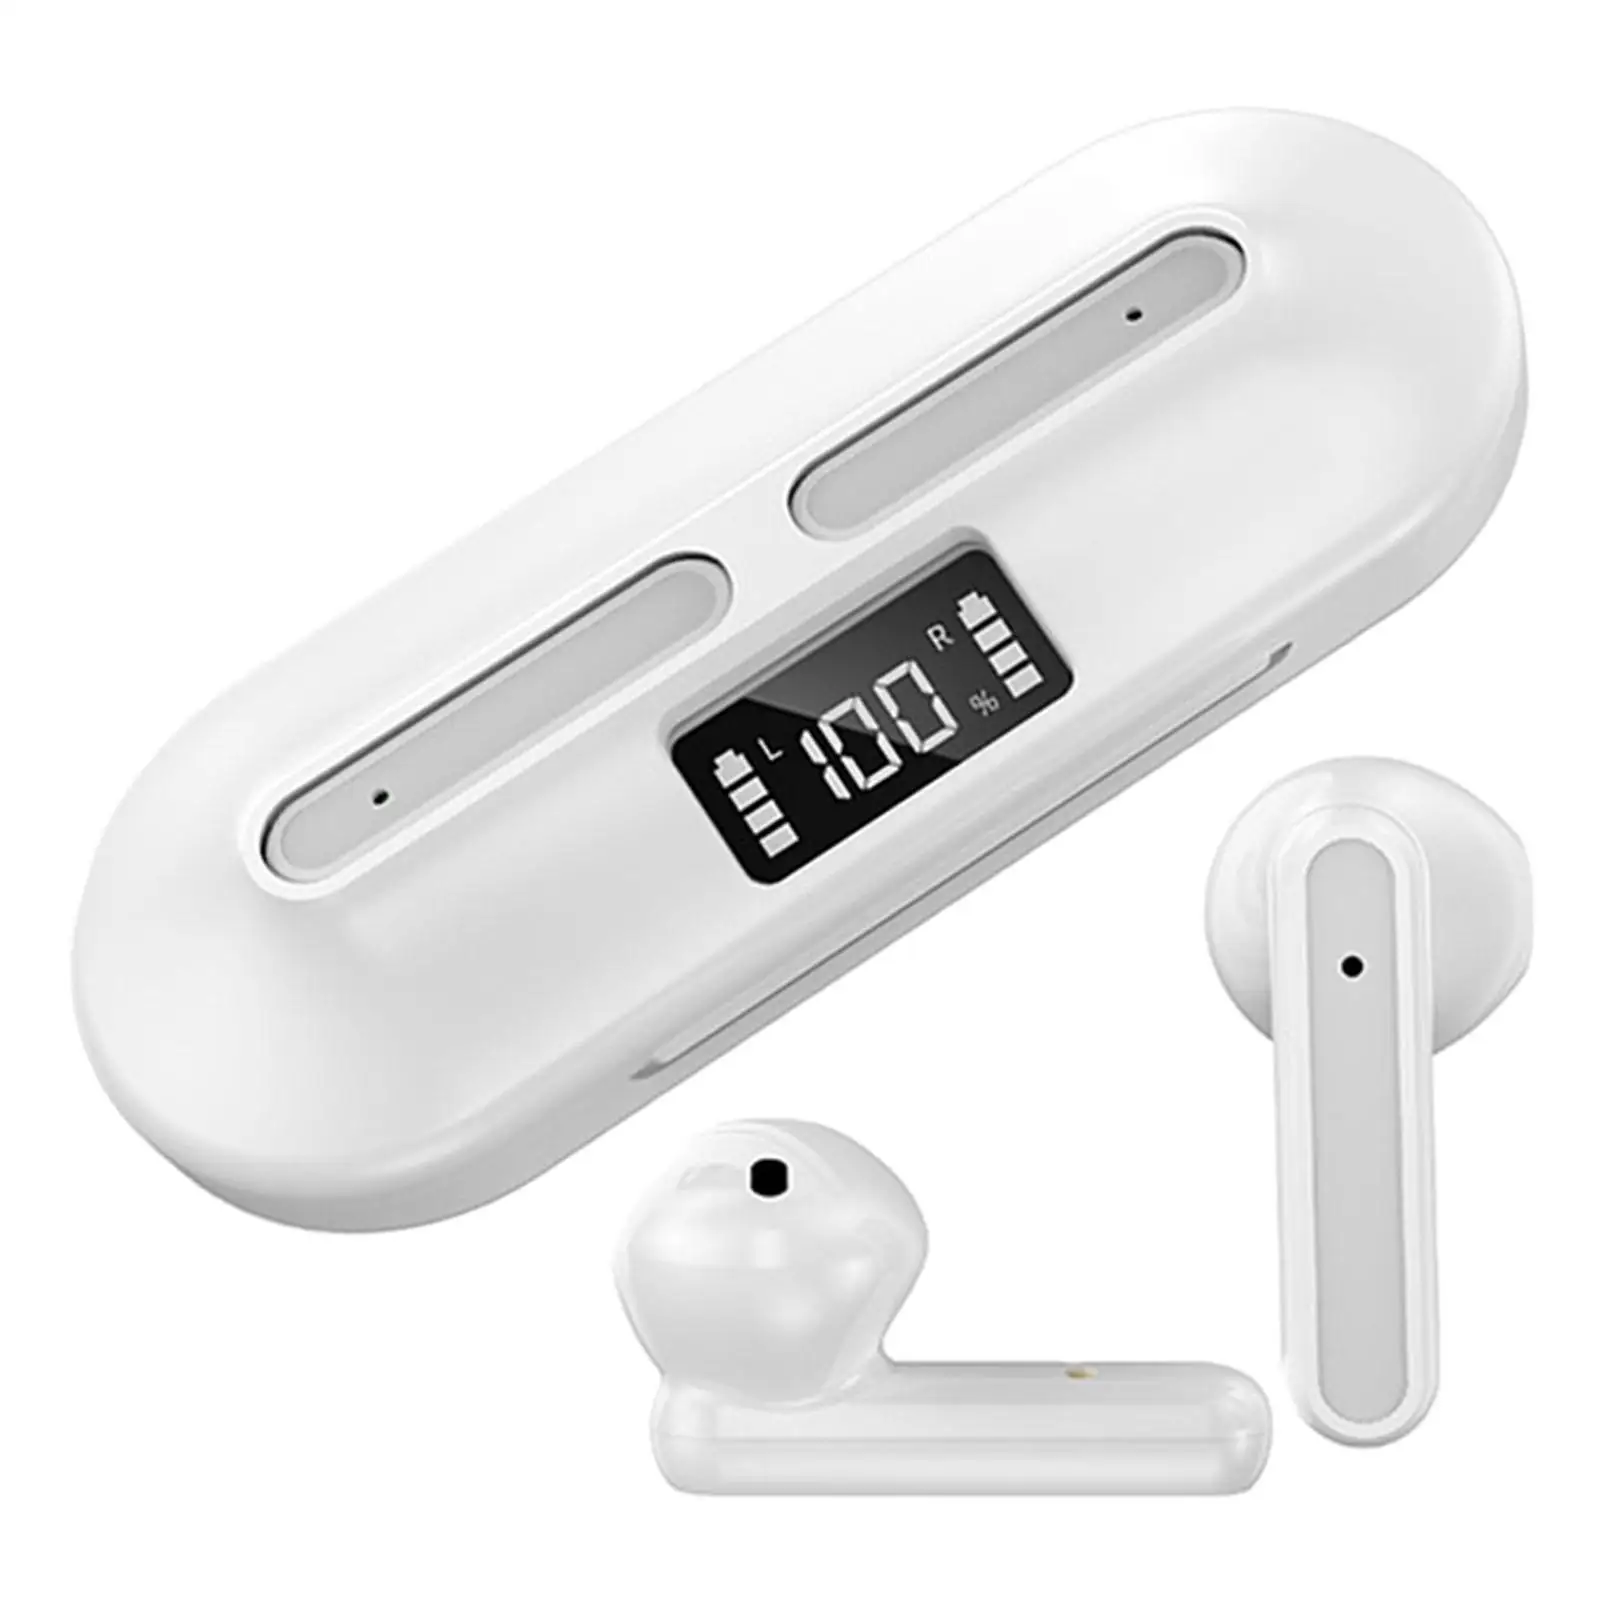 Wireless Earbuds in Ear with Mic Long Distance Connection Stereo Earphones Touch Control Bluetooth Headphones for Game Travel